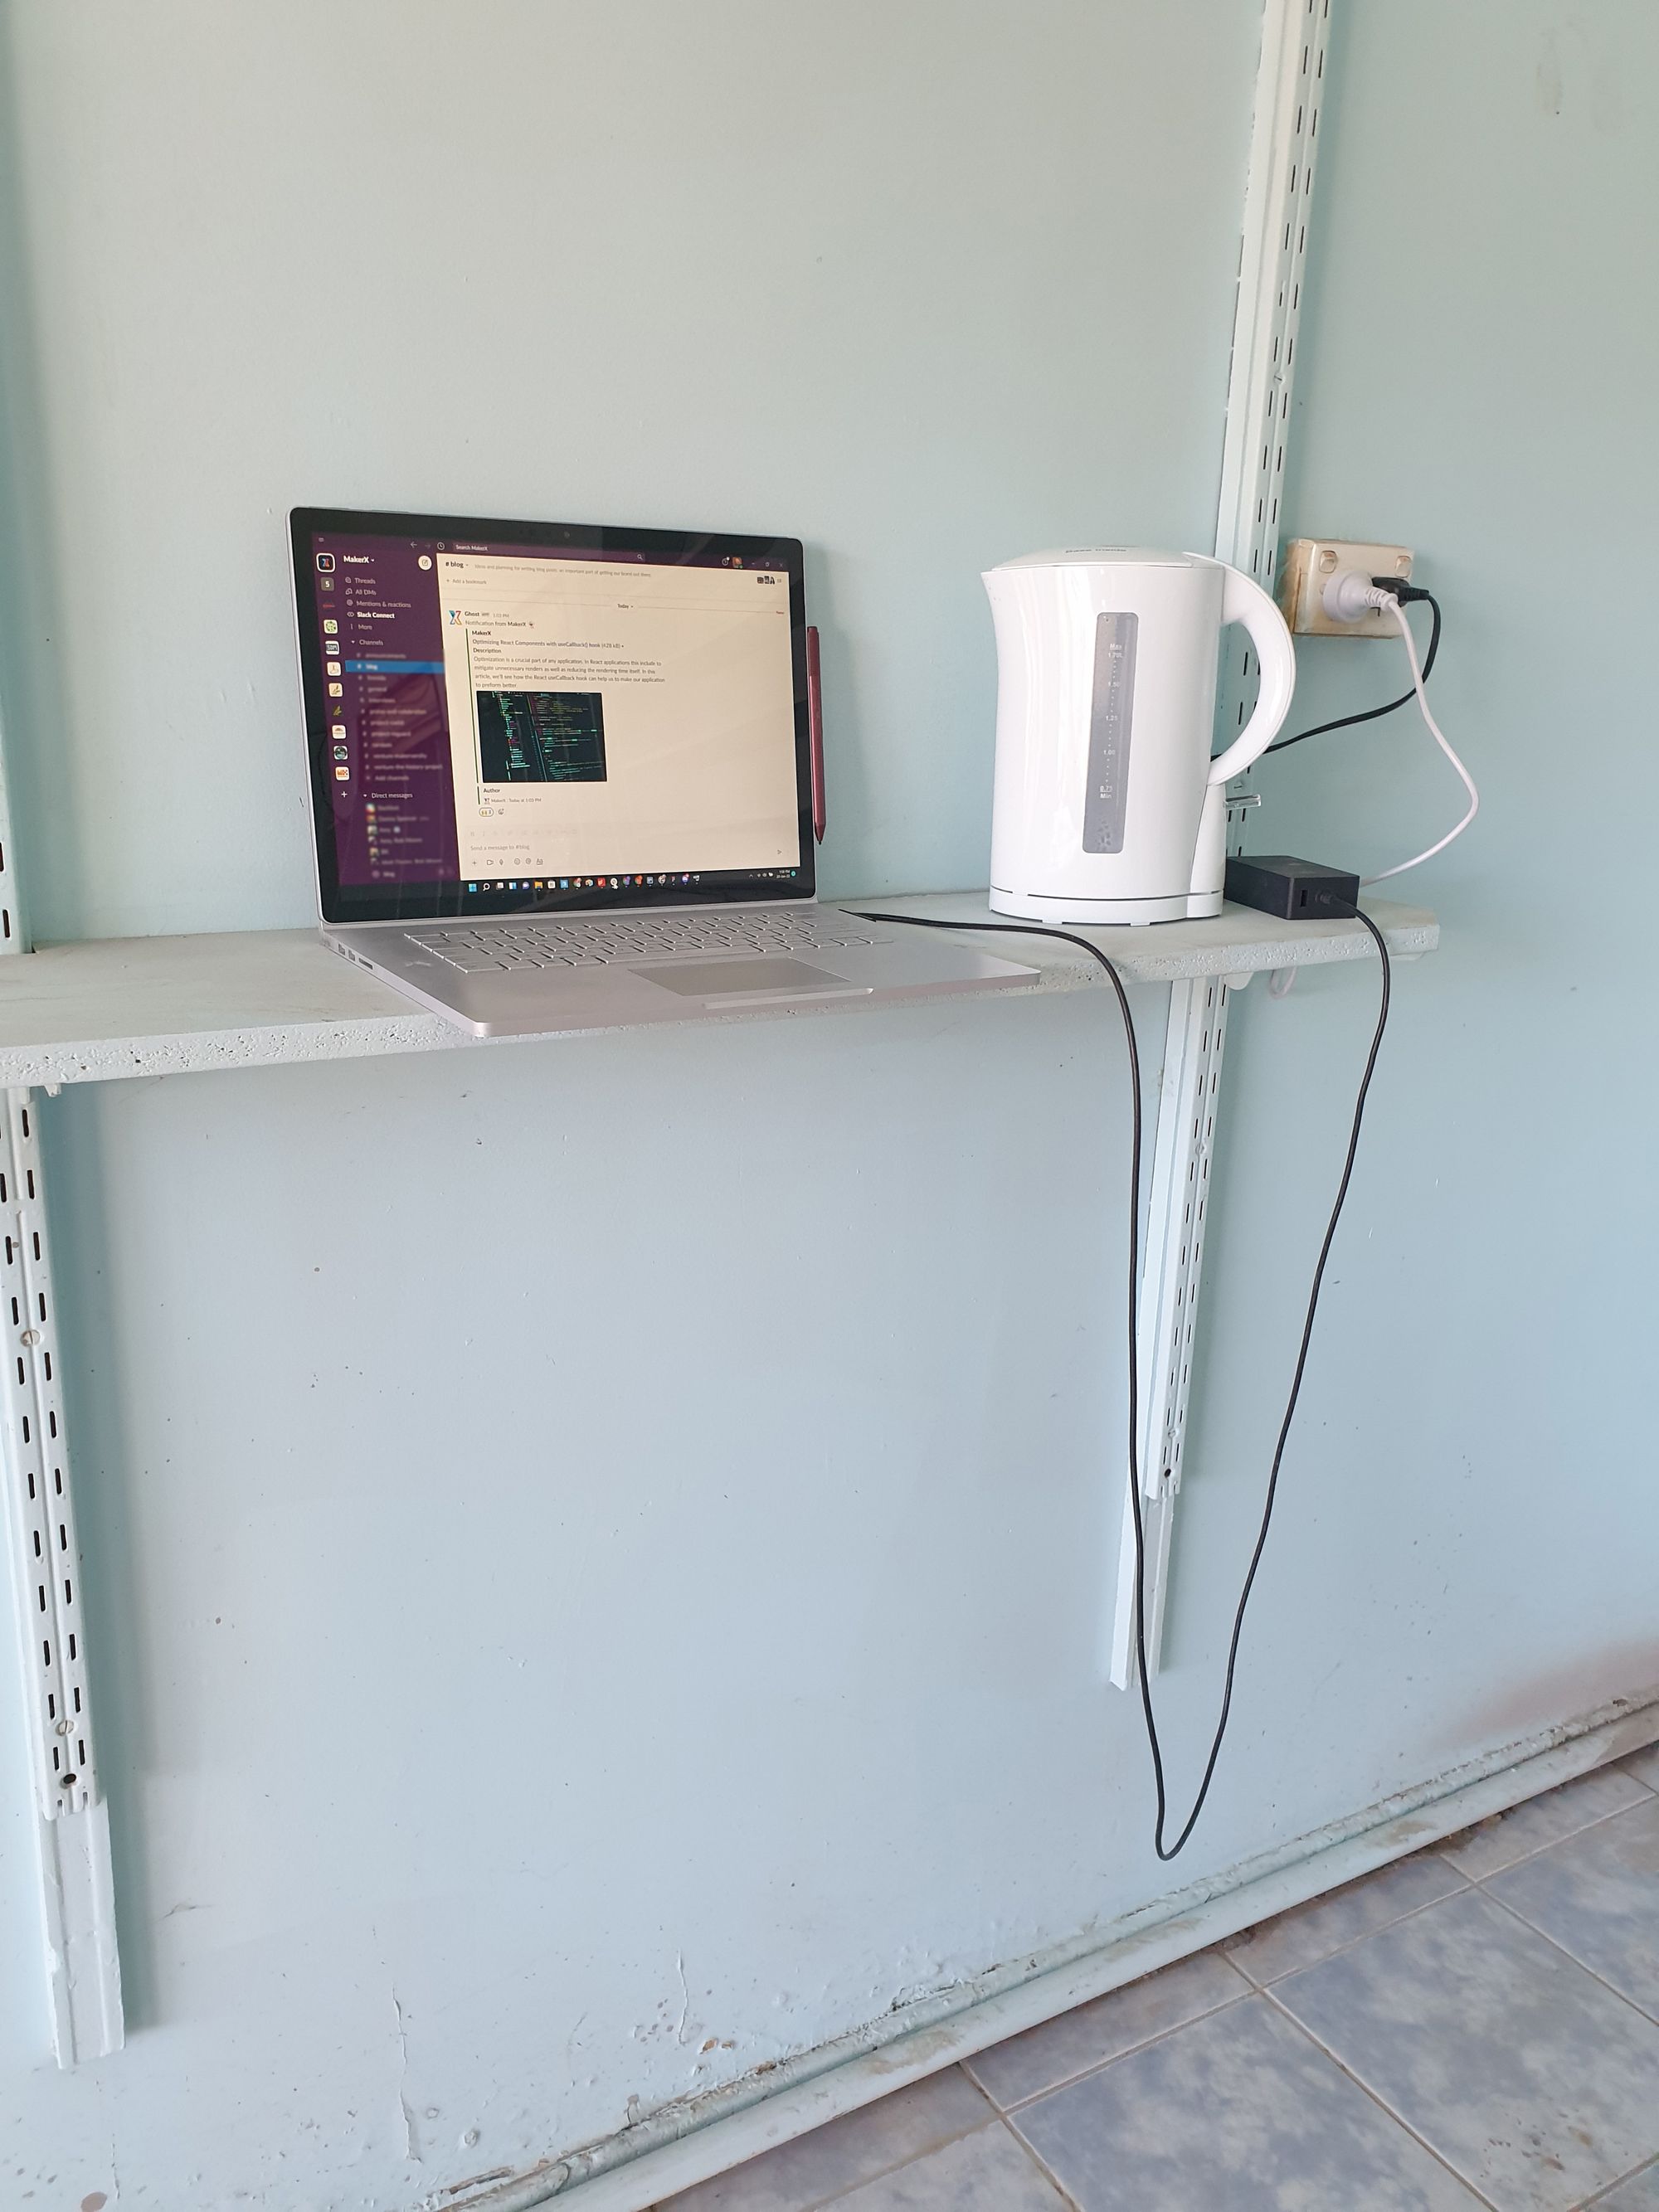 A shelf with a laptop and kettle